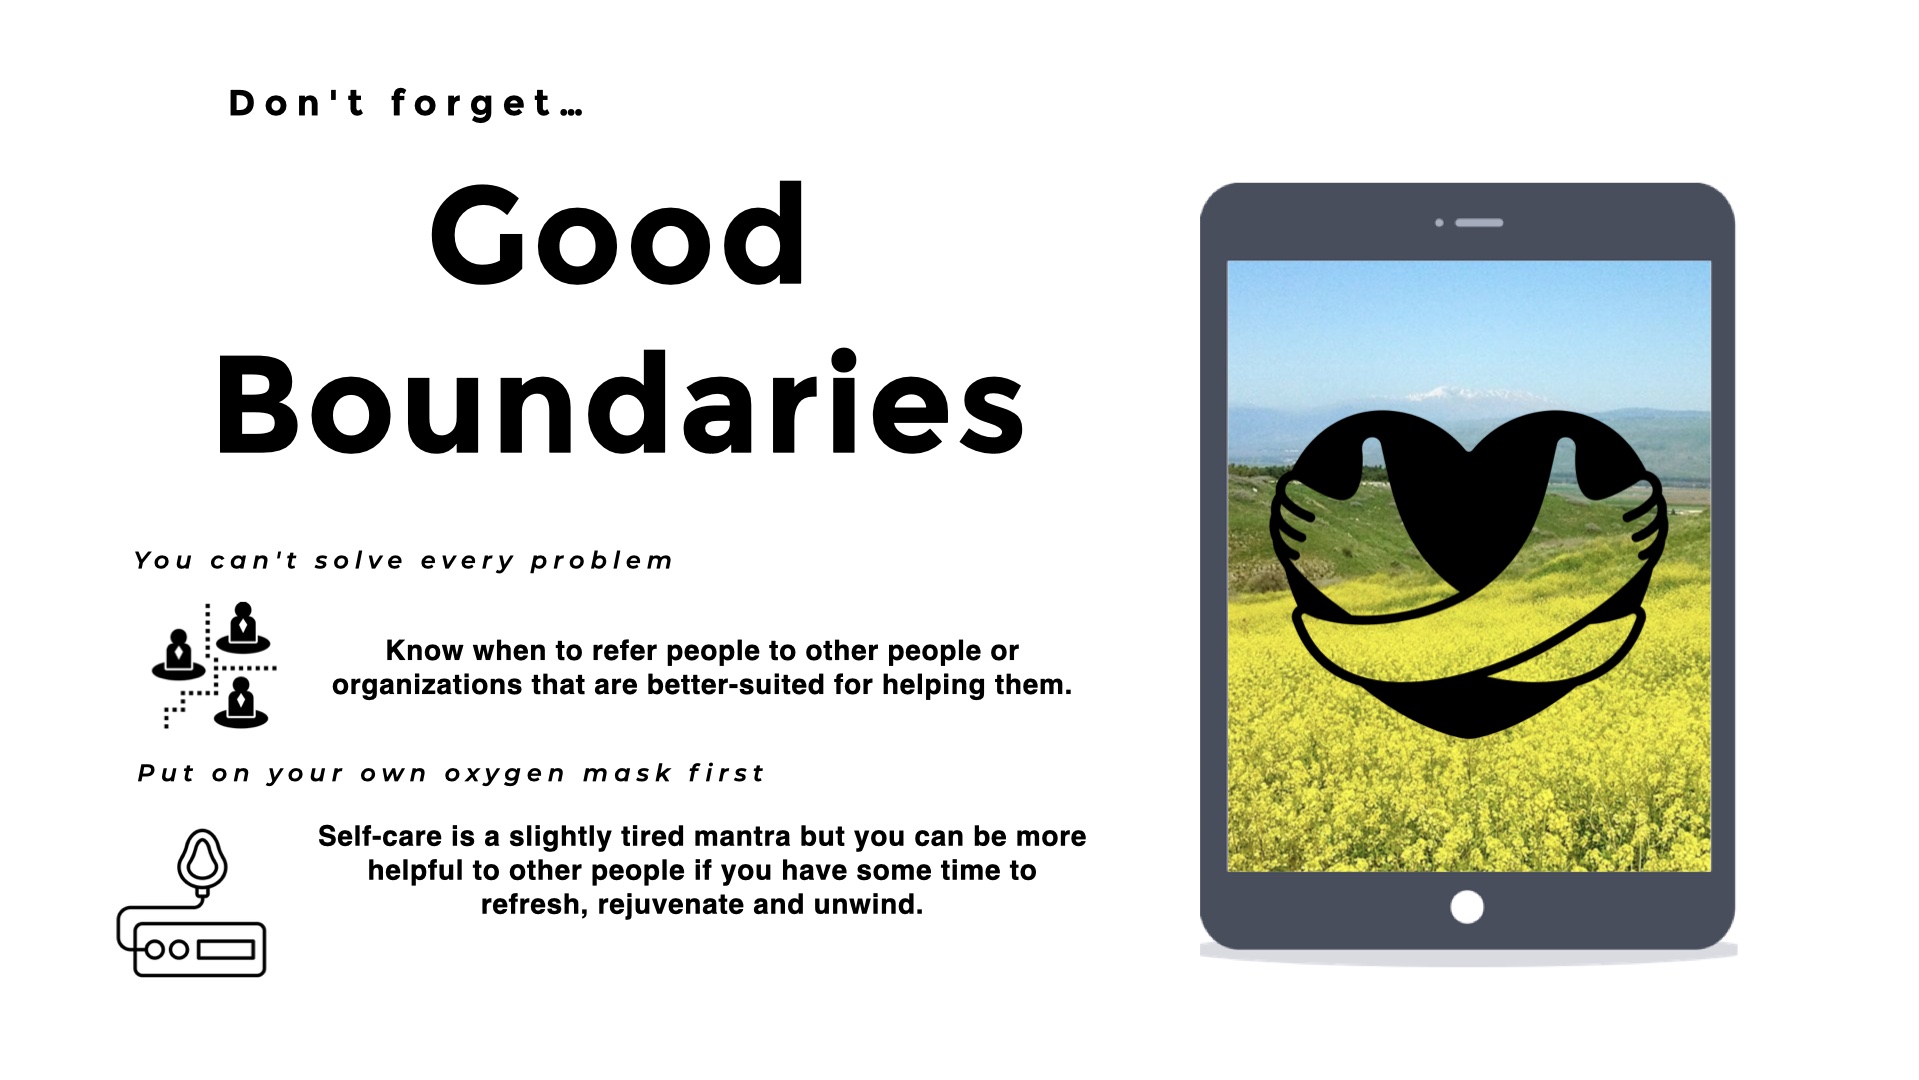 Image of an iphone showing a green field of flowers under a blue sky with in icon of a heart being embraced by hugging hands. Title: Don't forget Good Boundaries. Text: You can't solve every problem. Know when to refer people to other people or organizations that are better-suited for helping them. Put on your own oxygen mask first. Self-care is a slightly tired mantra but you can be more helpful to other people if you have some time to refresh, rejuvenate and unwind.